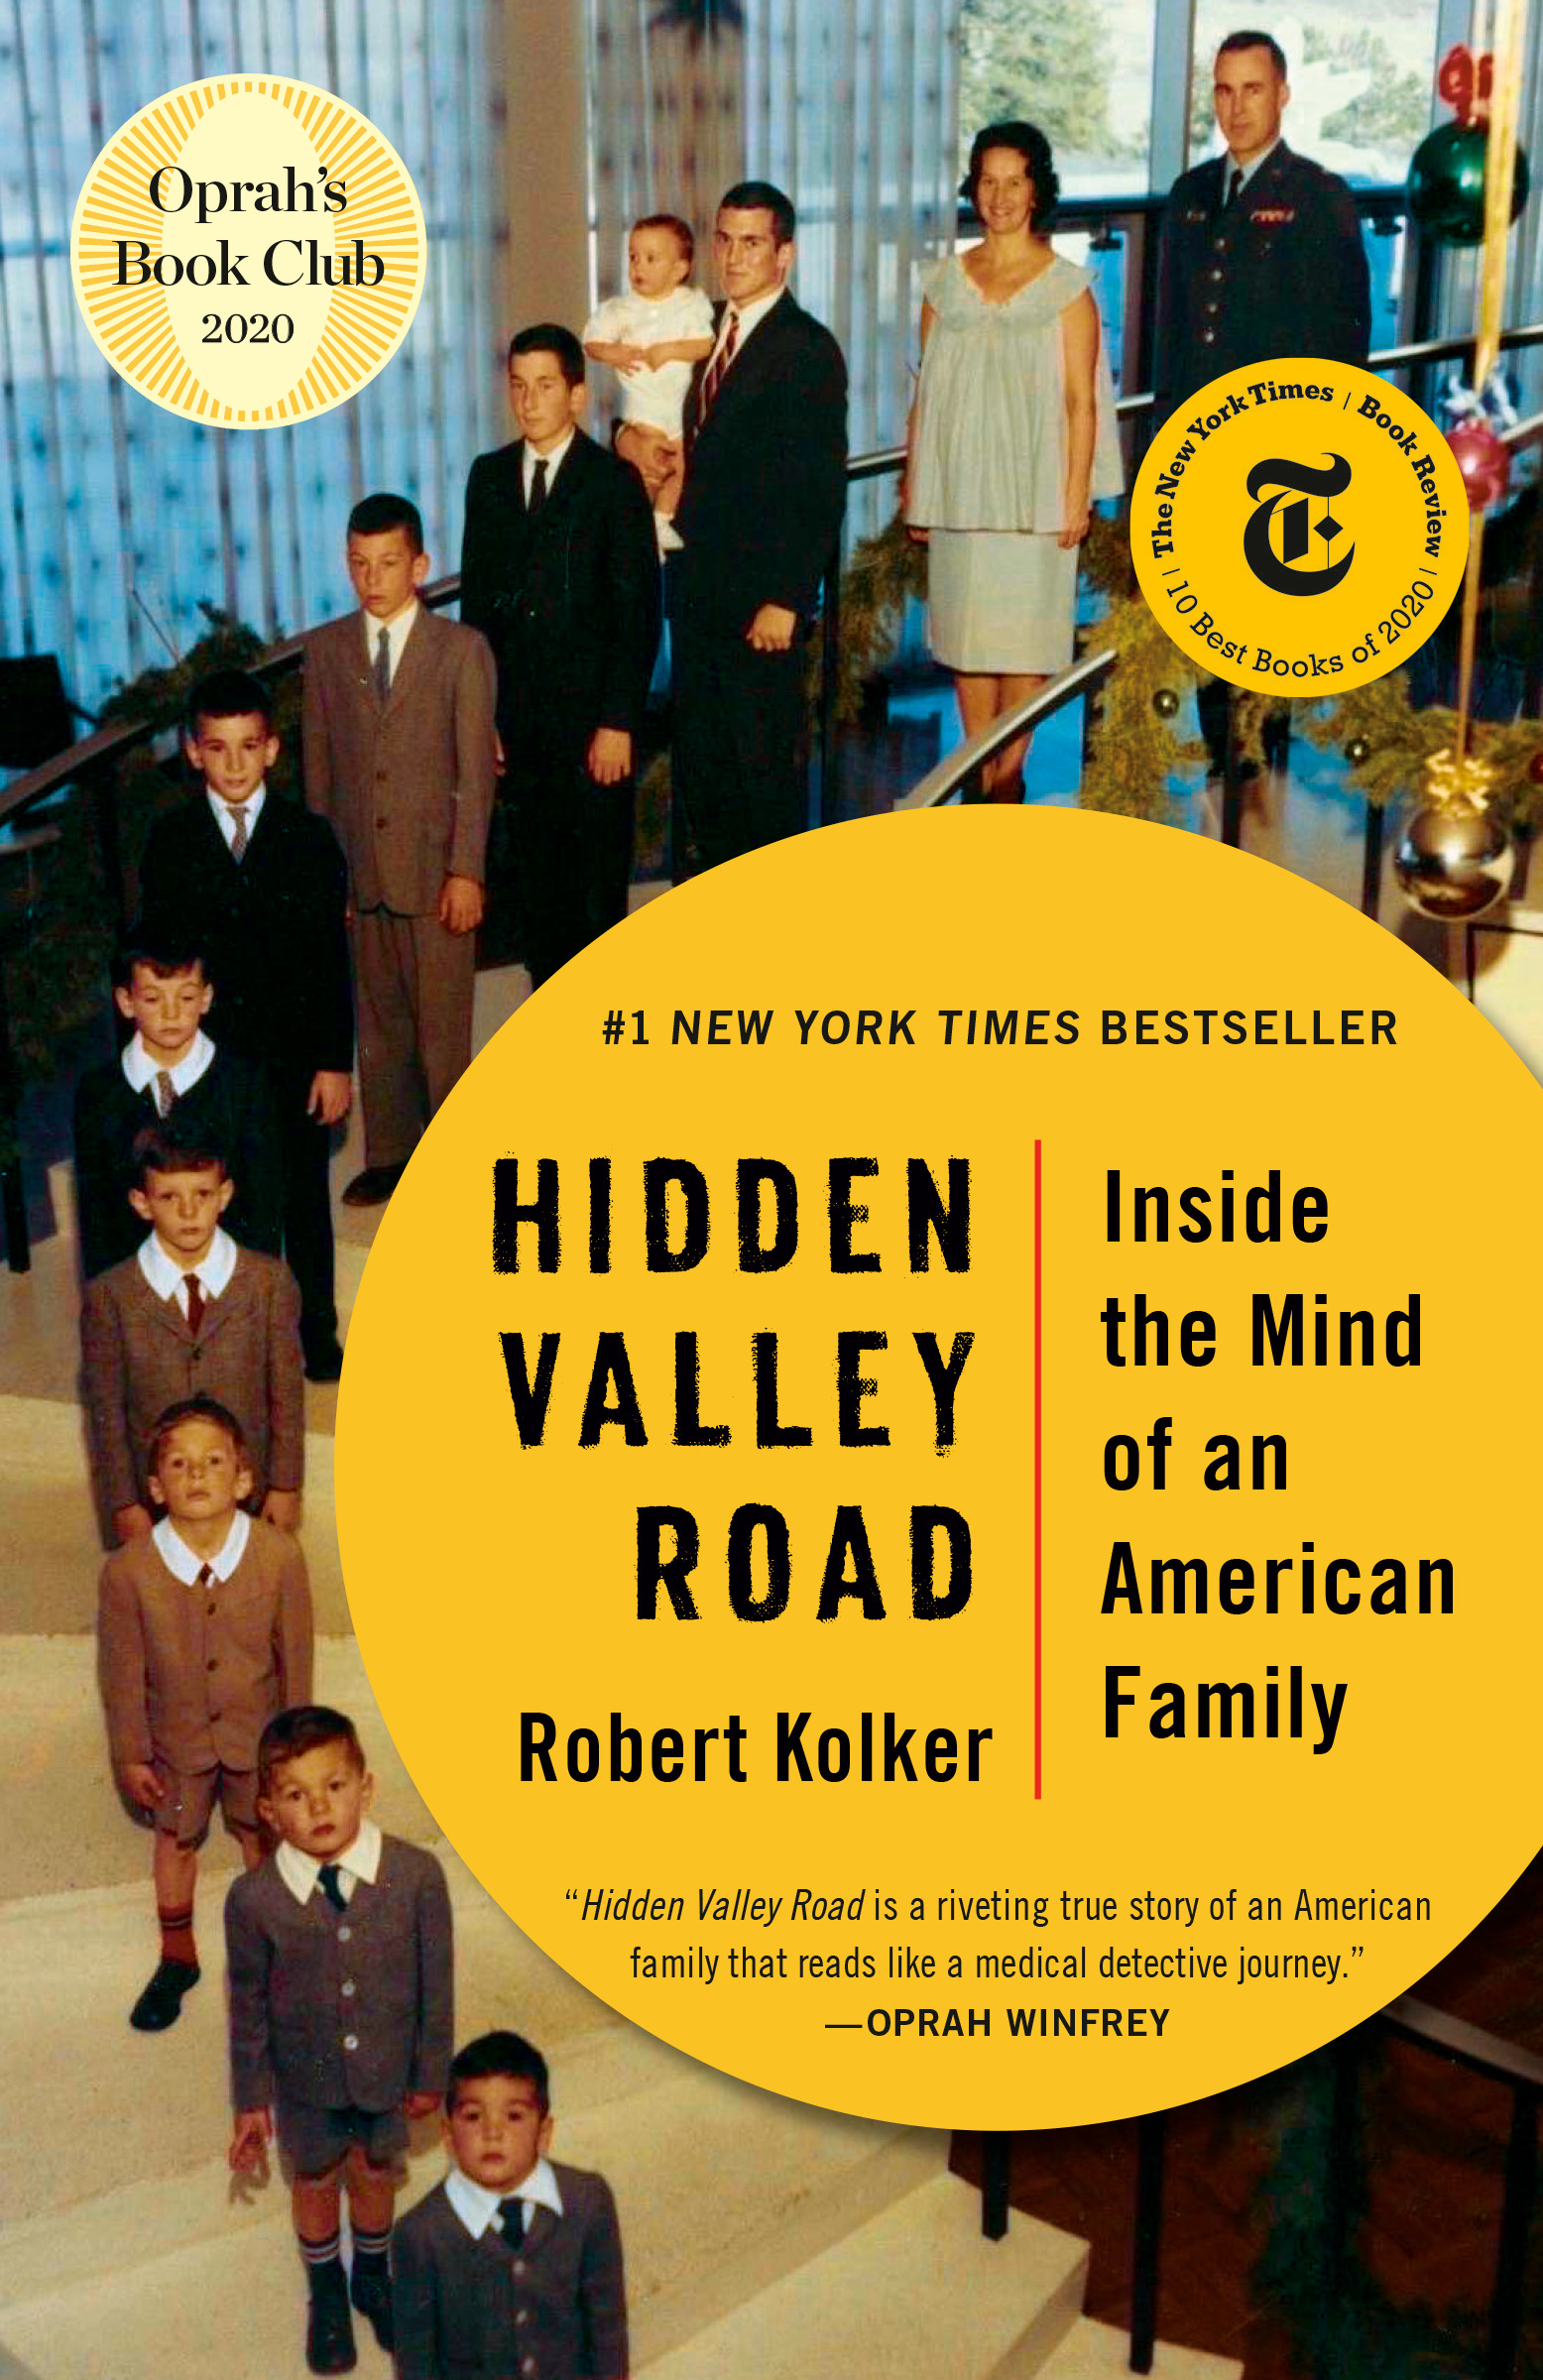 Download Hidden valley road inside the mind of an american family by robert kolker No Survey